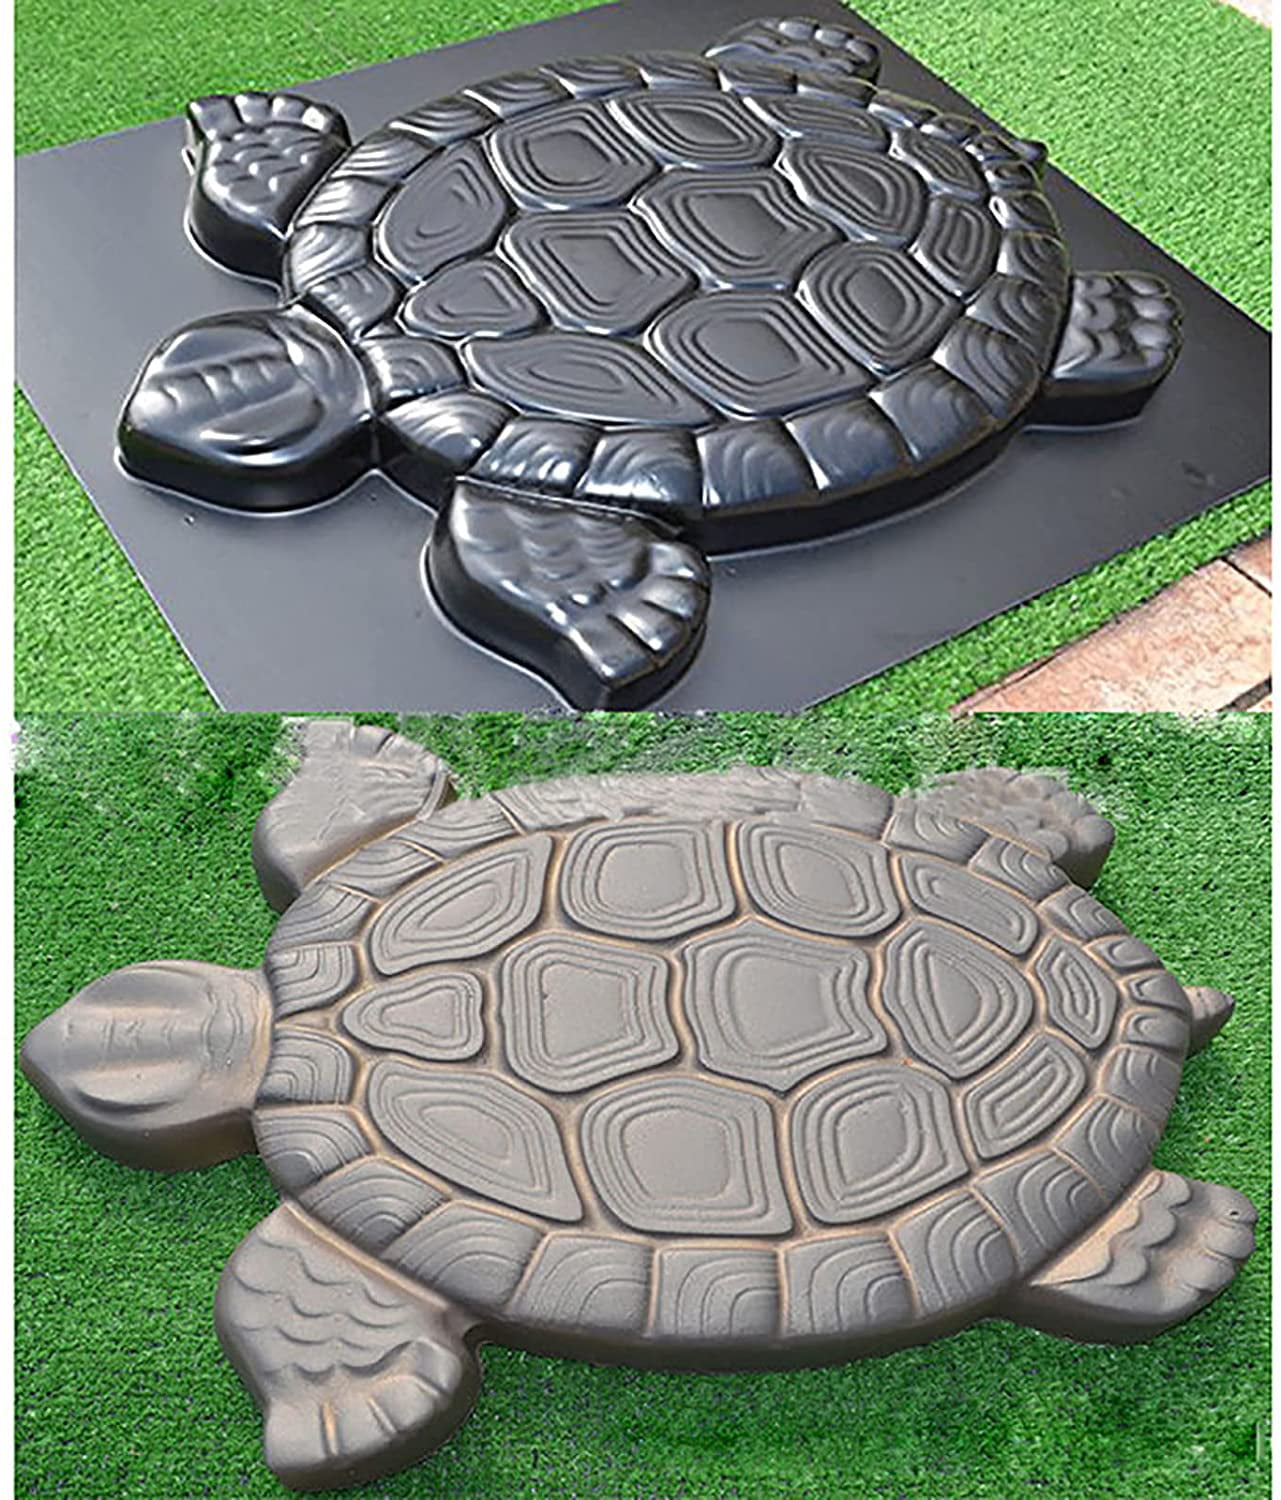 Turtle stepping stone concrete plaster mold mould 